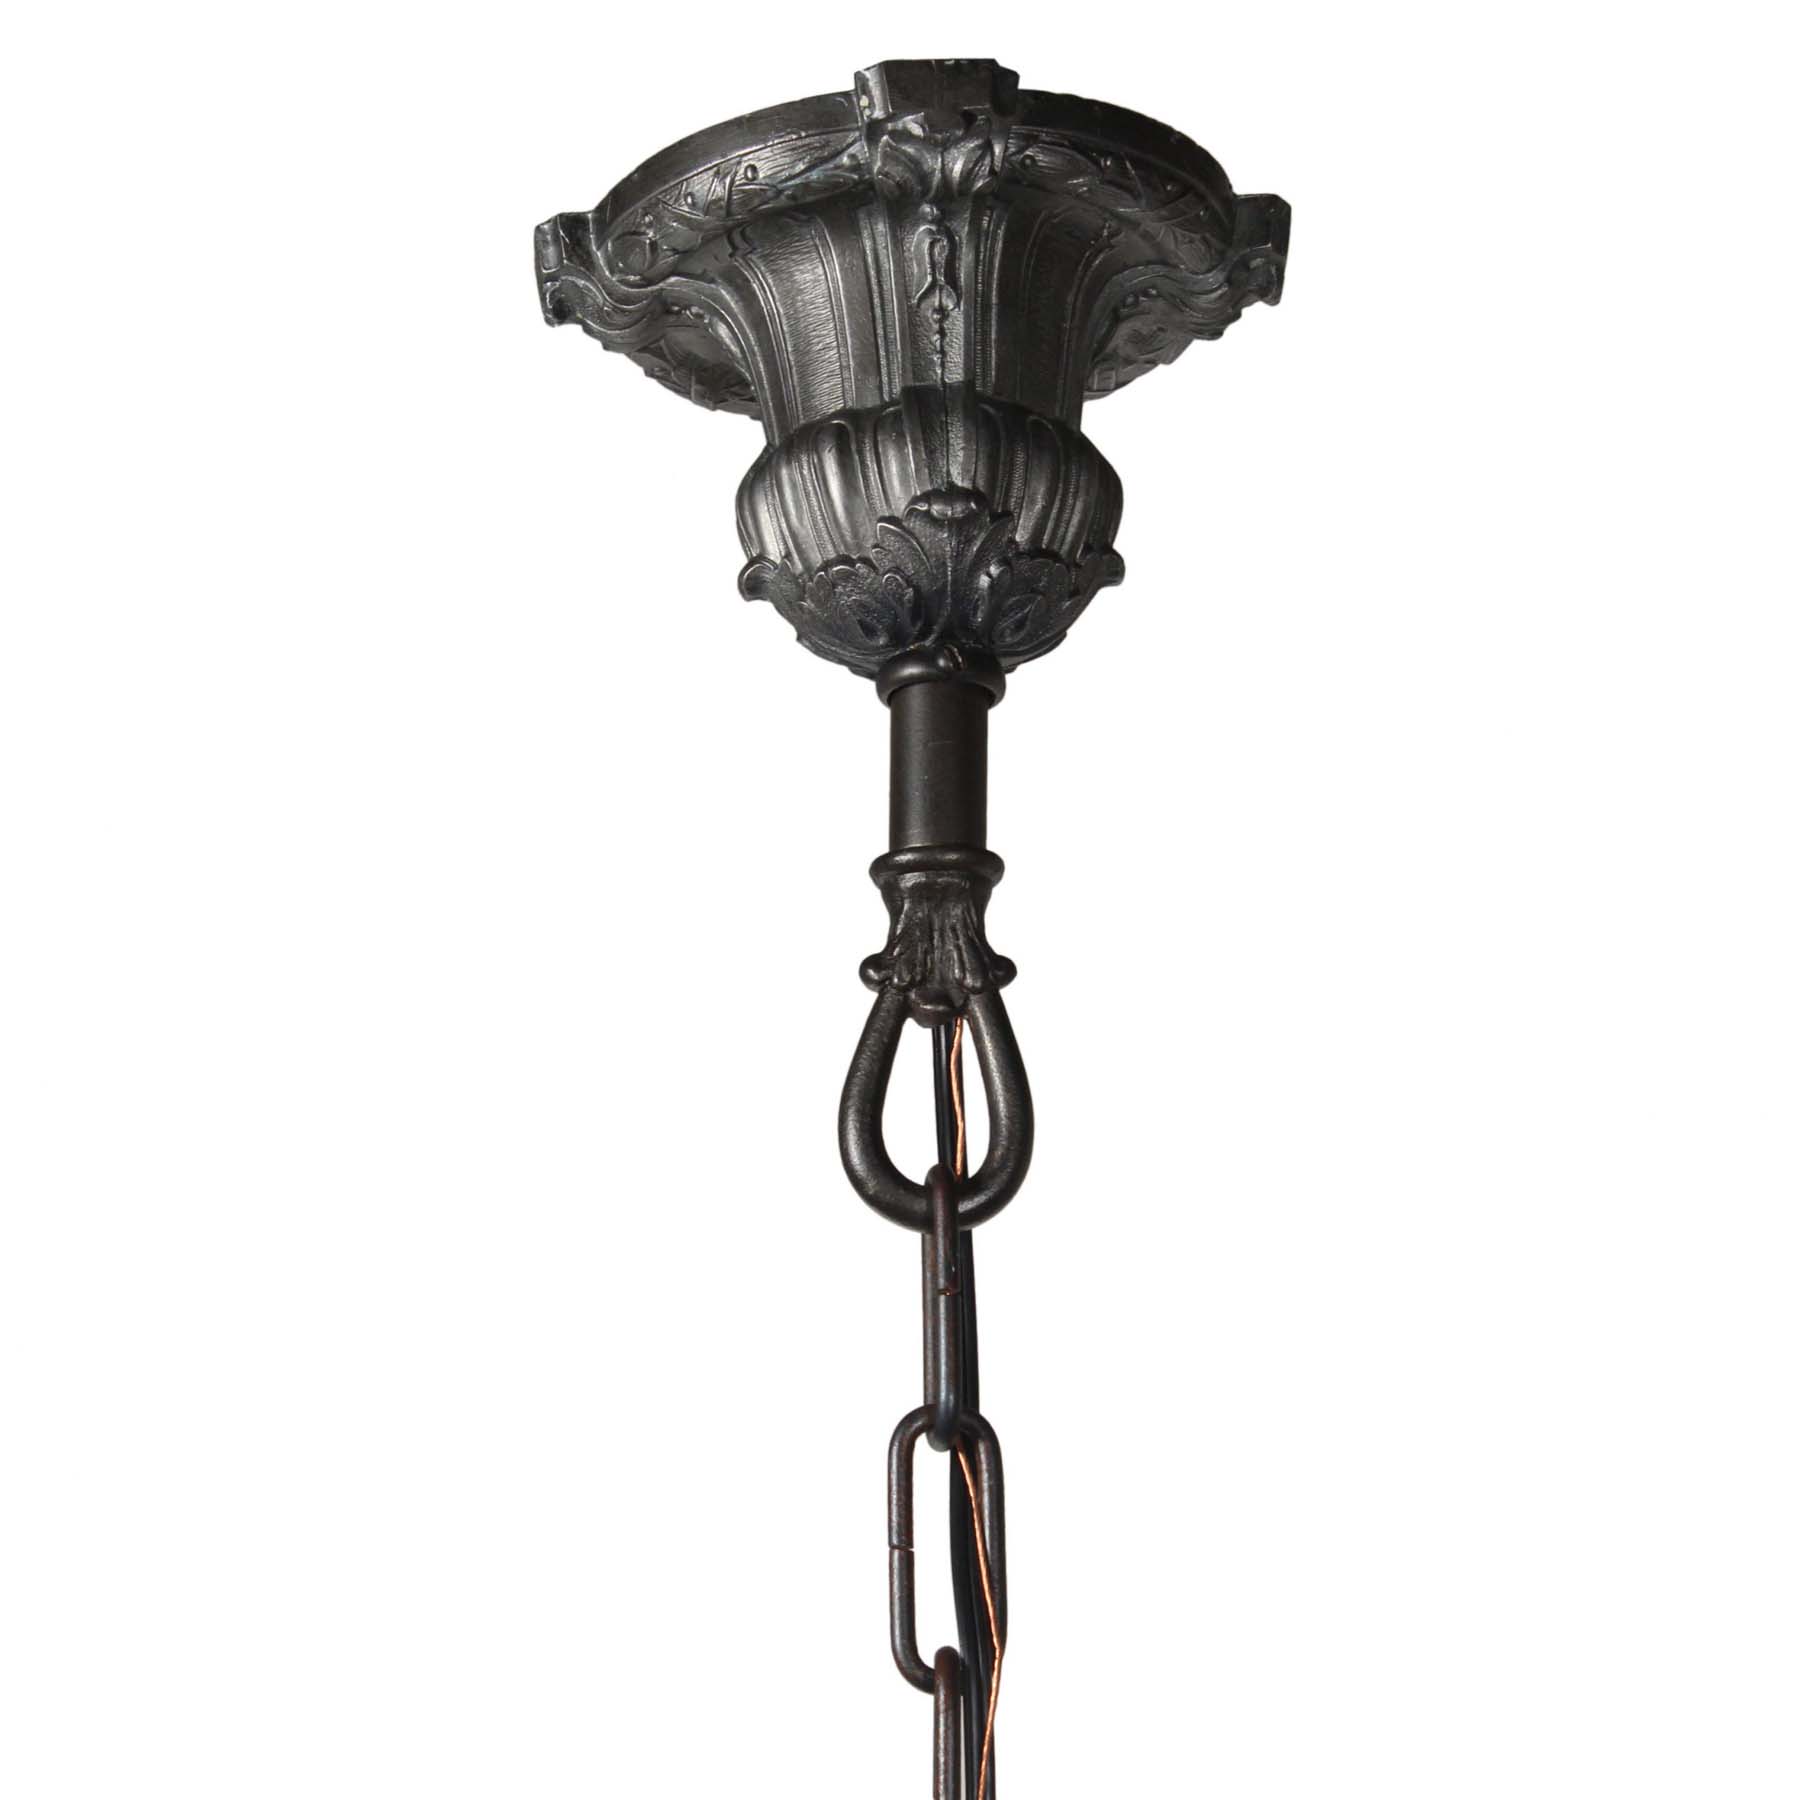 SOLD Antique Figural Neoclassical Chandelier with Prisms, Adam Style-67503